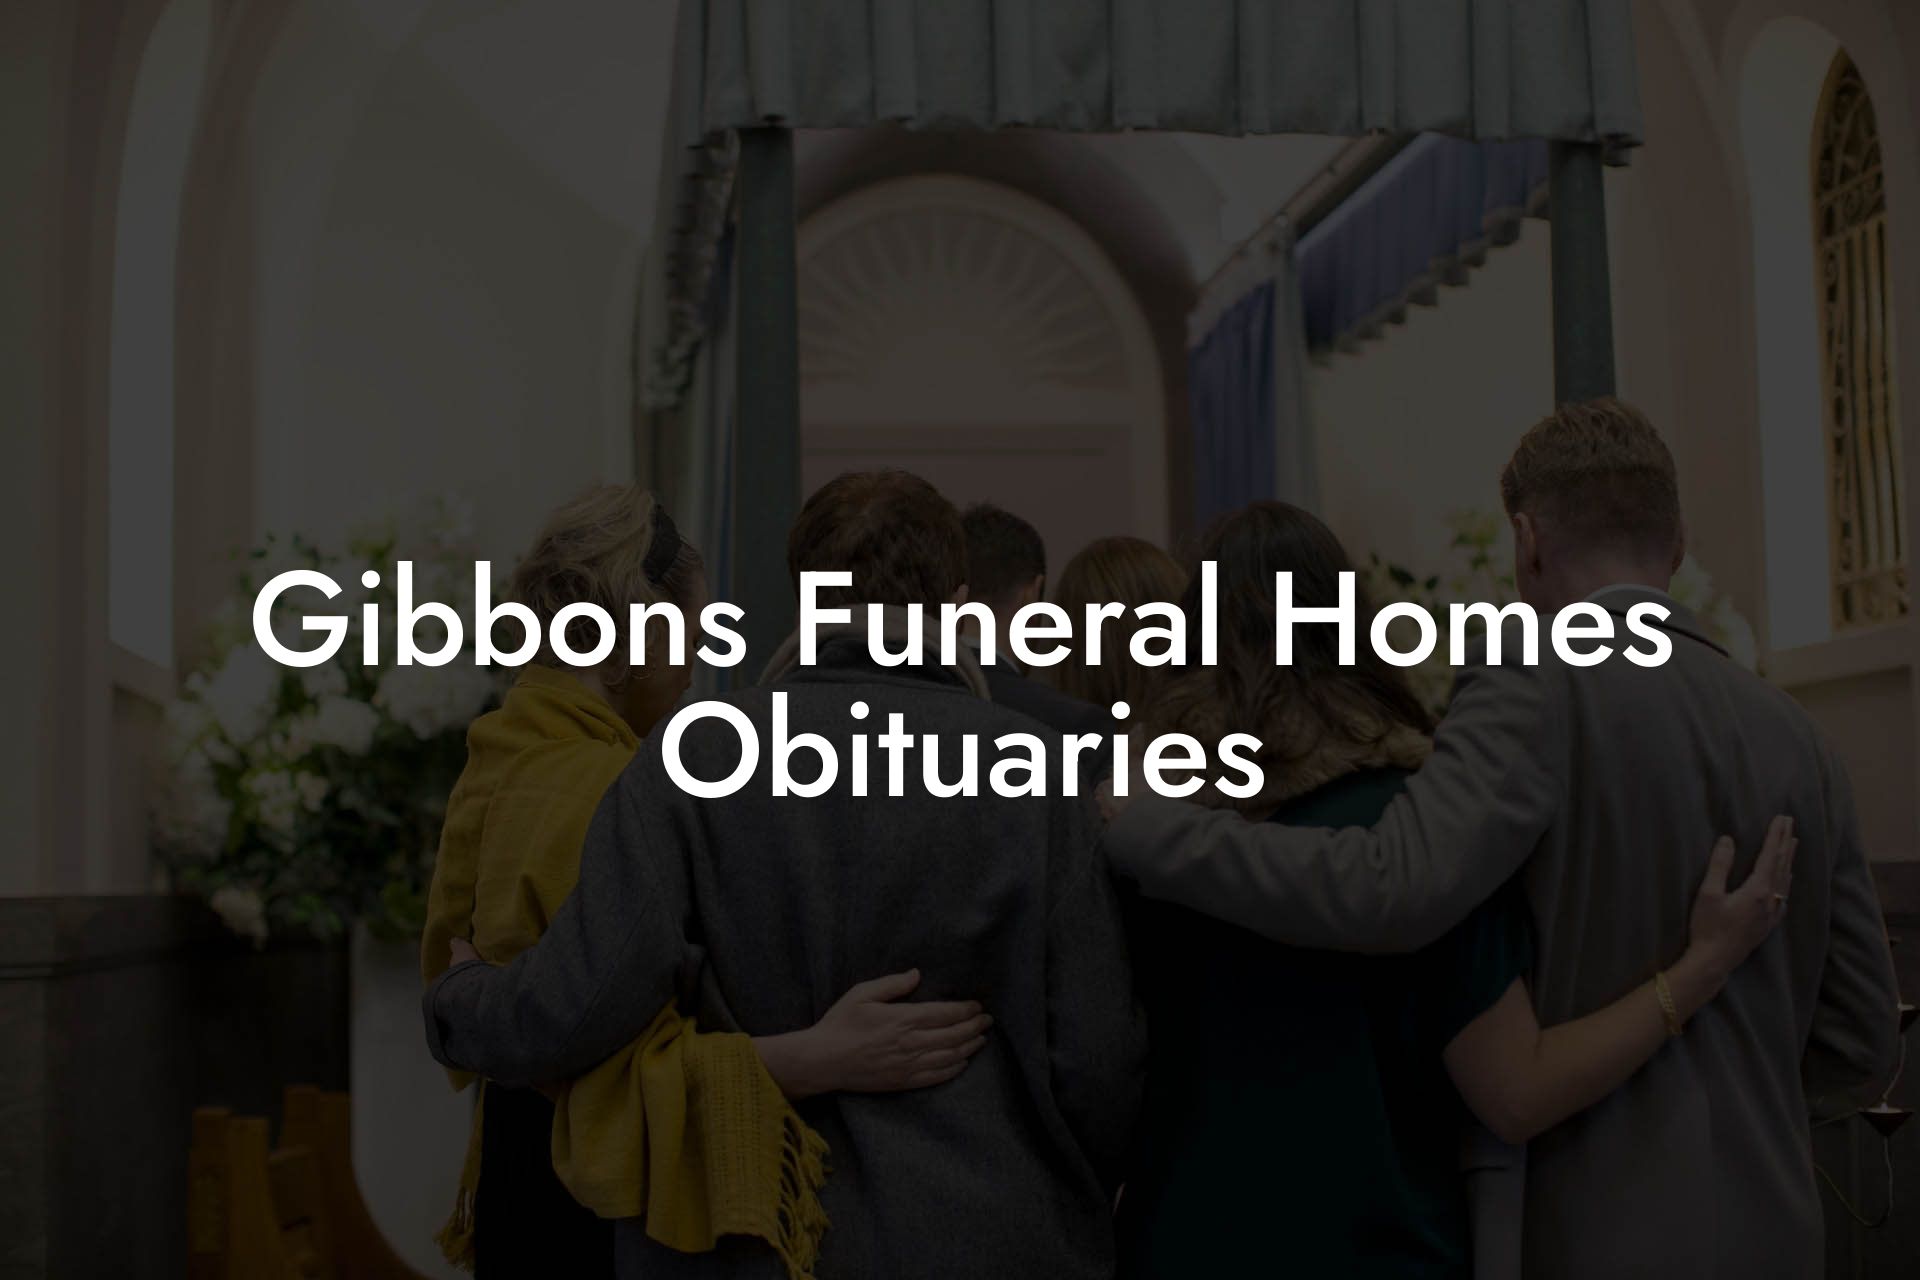 Gibbons Funeral Homes Obituaries